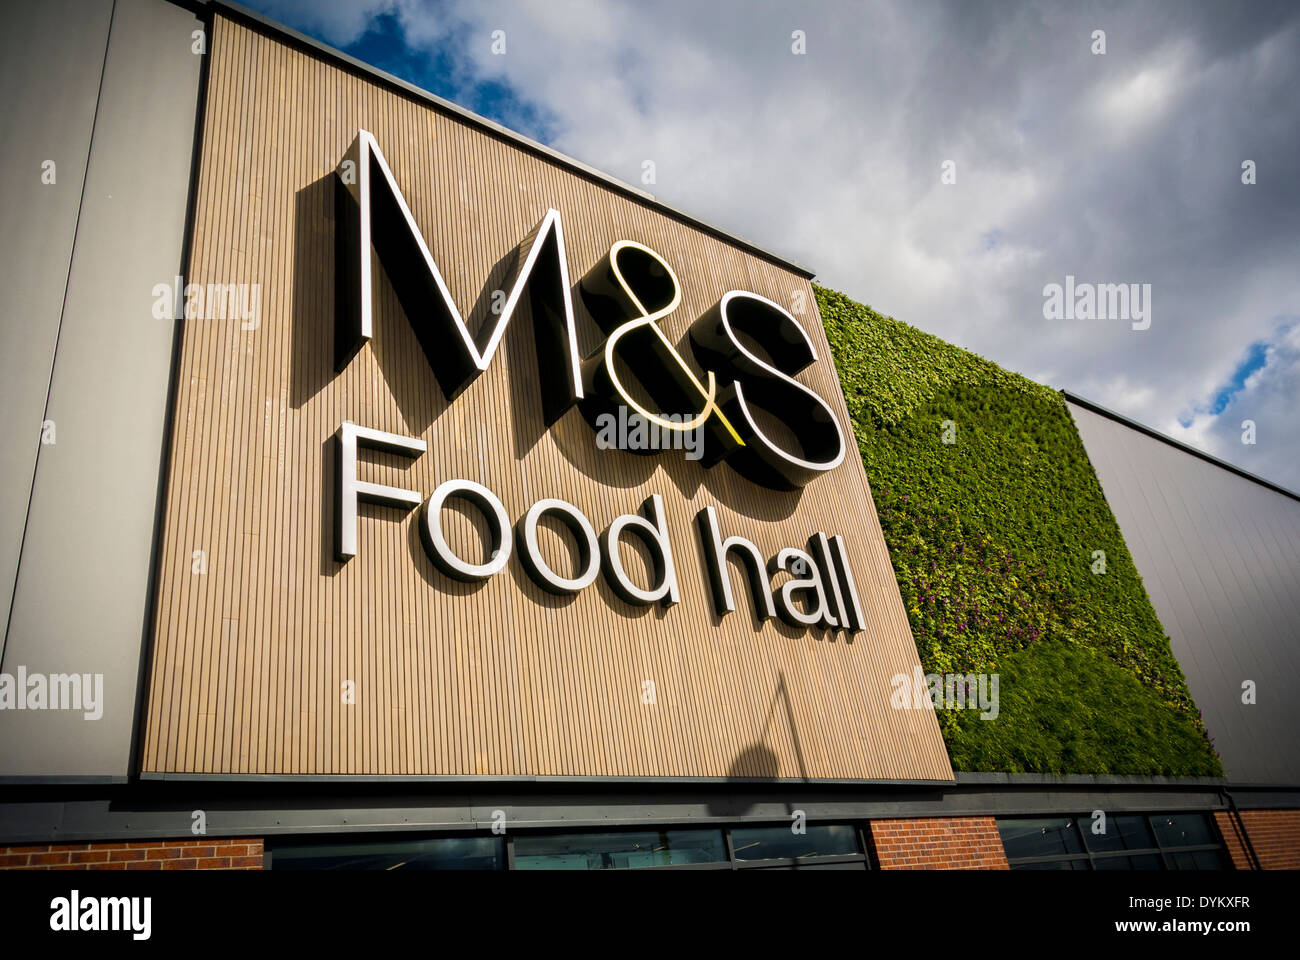 Marks And Spencer Food Hall sign with Green Living Wall Stock Photo